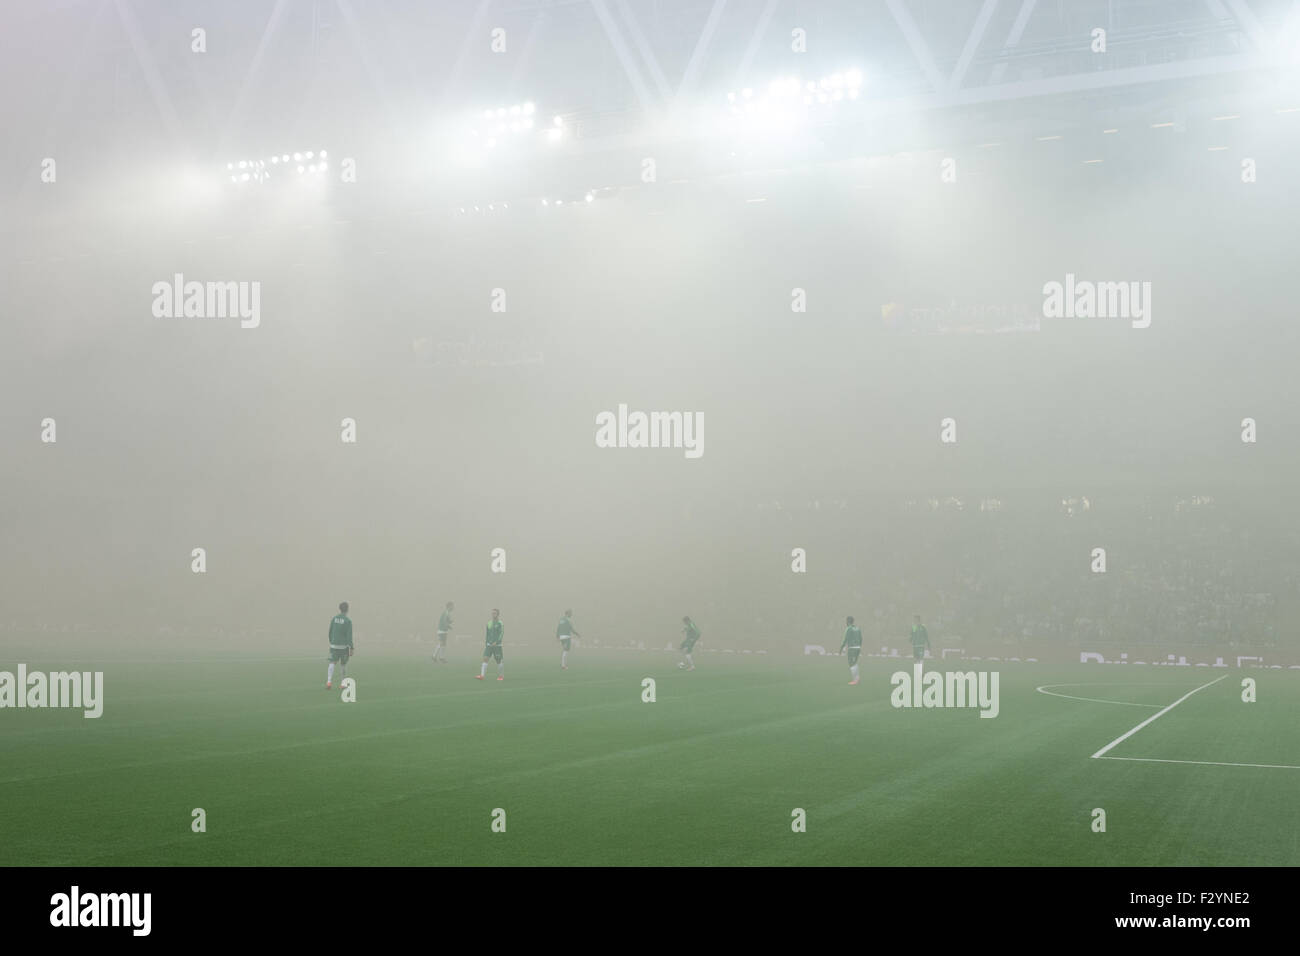 Temporary break during a football match due to pyro show at local derby between Stockholm rivals Djurgårdens IF and Hammarby IF. Stock Photo